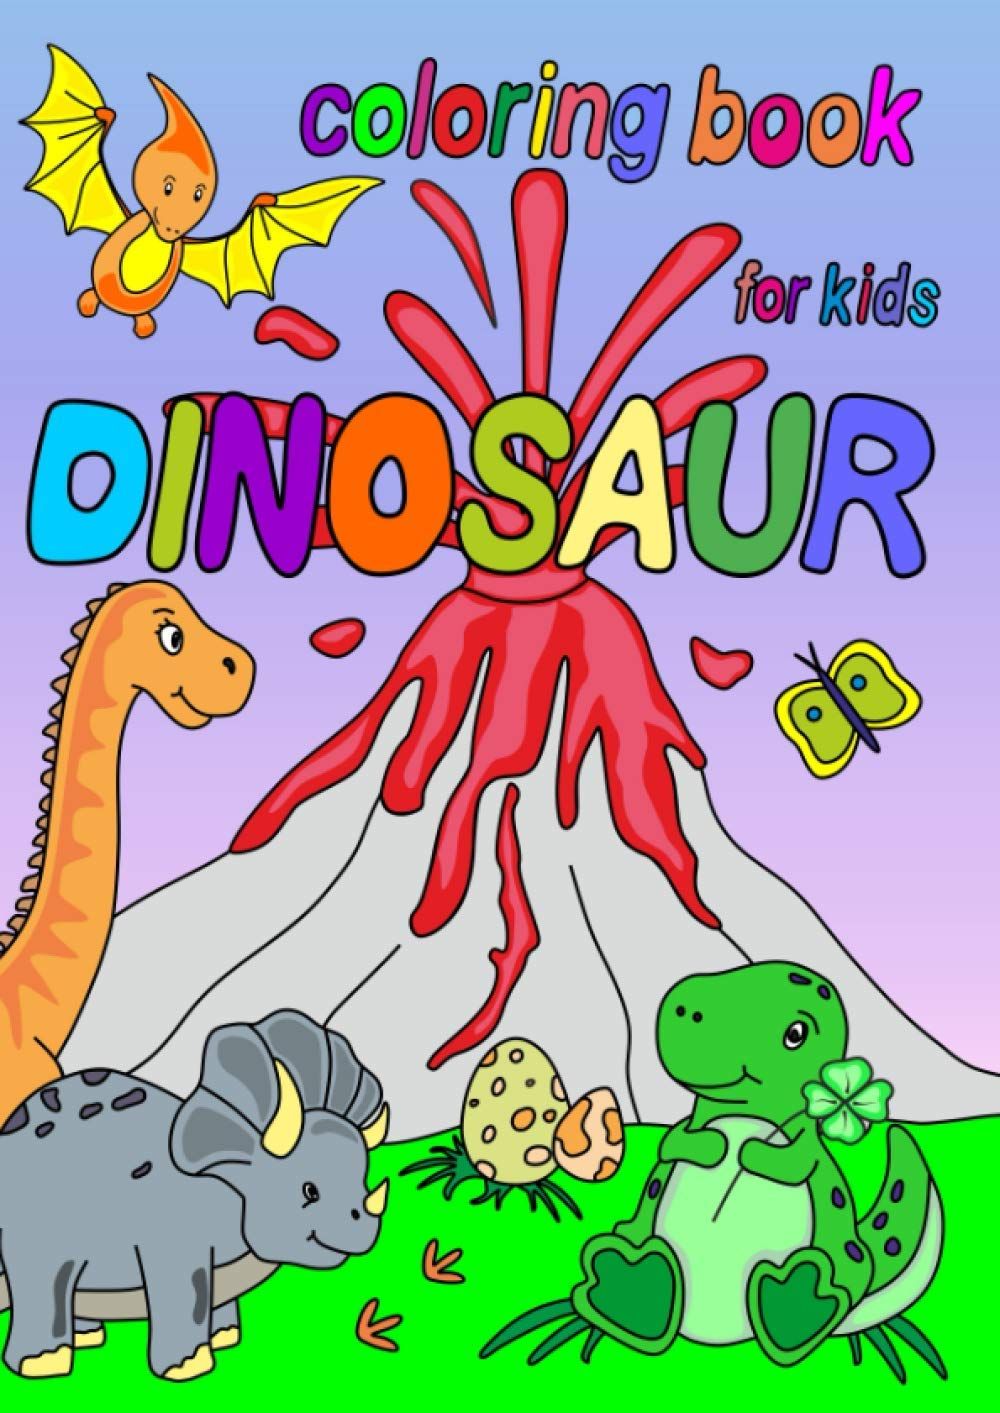 Dinosaur Coloring Book for Kids by ColoredUniverse with an exploding volcano and a few dinosaurs on the cover